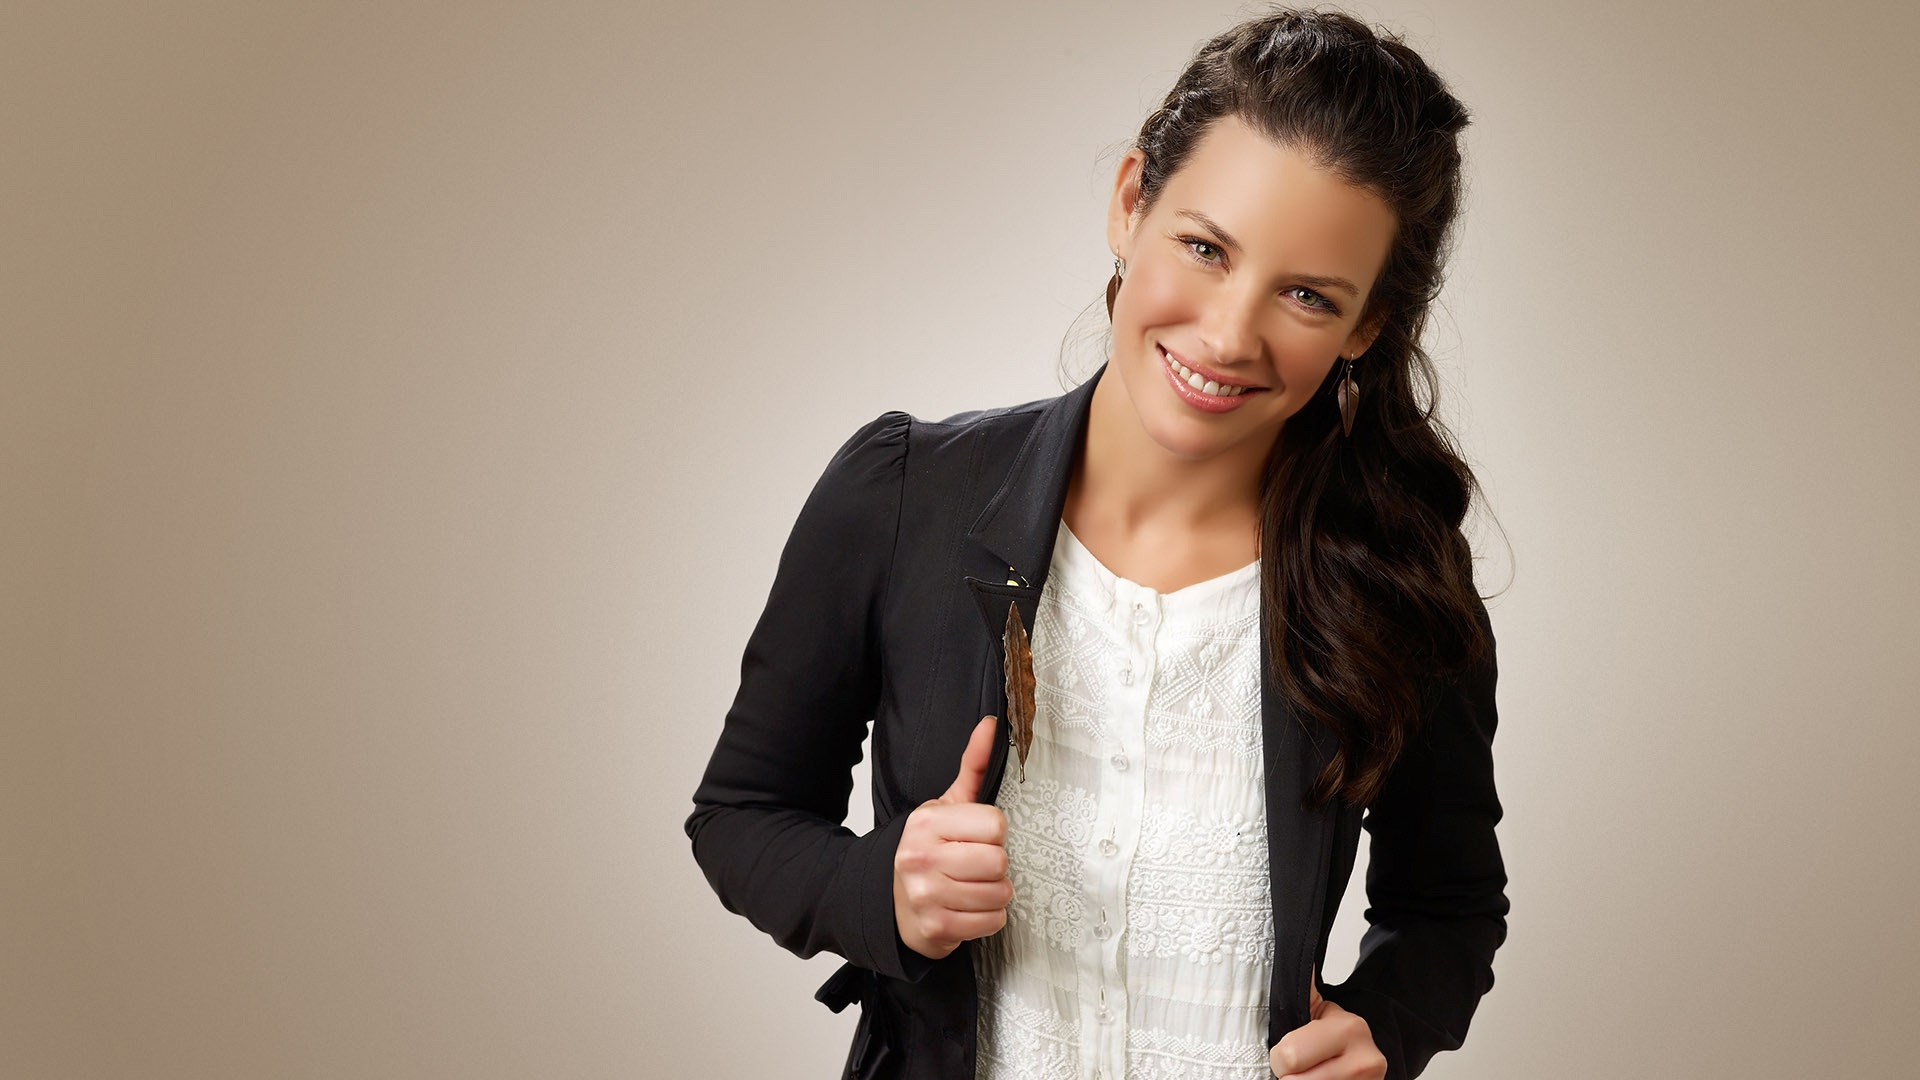 Evangeline Lilly Cute for 1920 x 1080 HDTV 1080p resolution